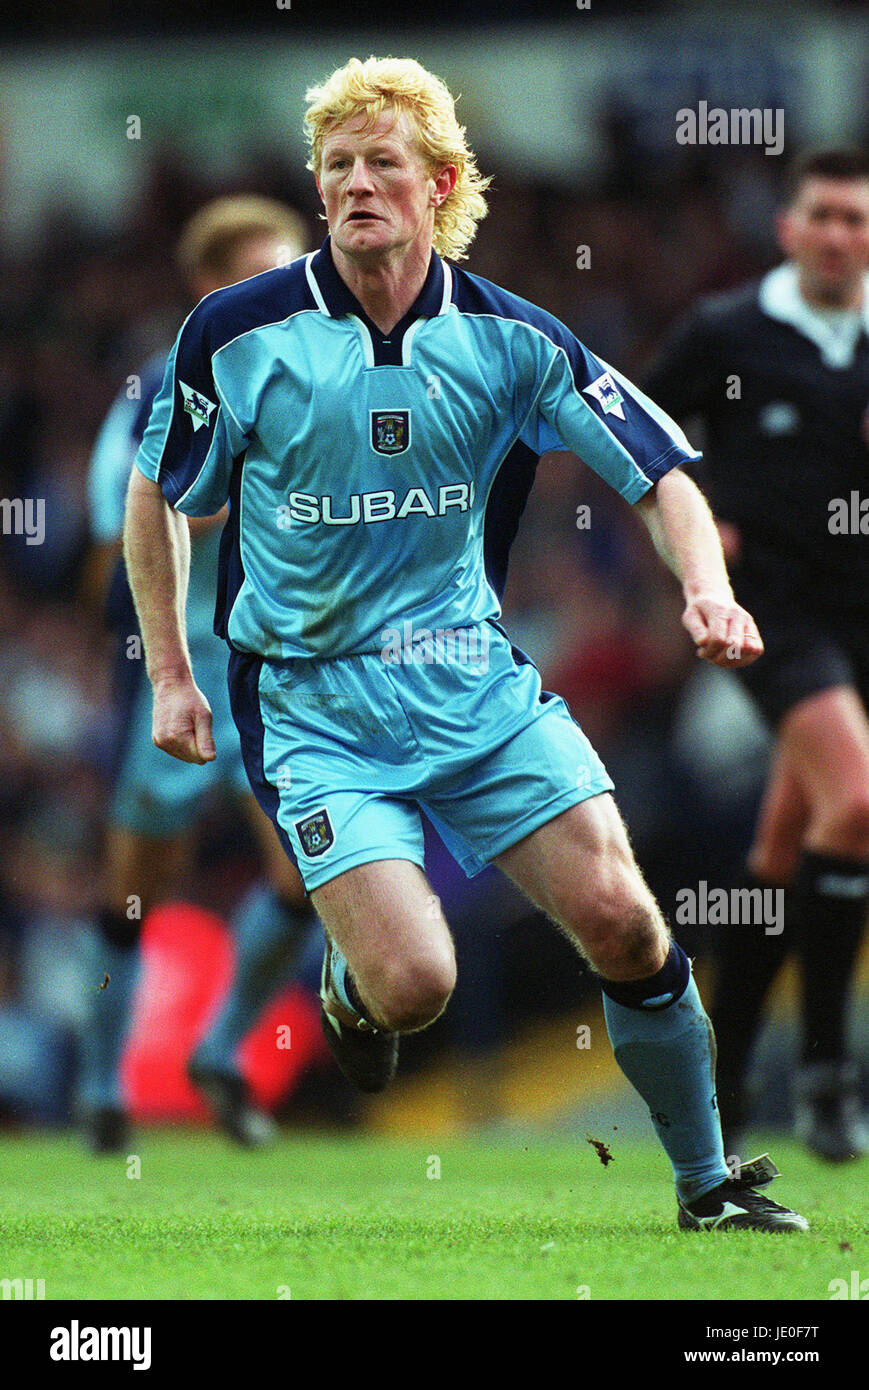 COLIN HENDRY COVENTRY CITY FC 04 mars 2000 Banque D'Images